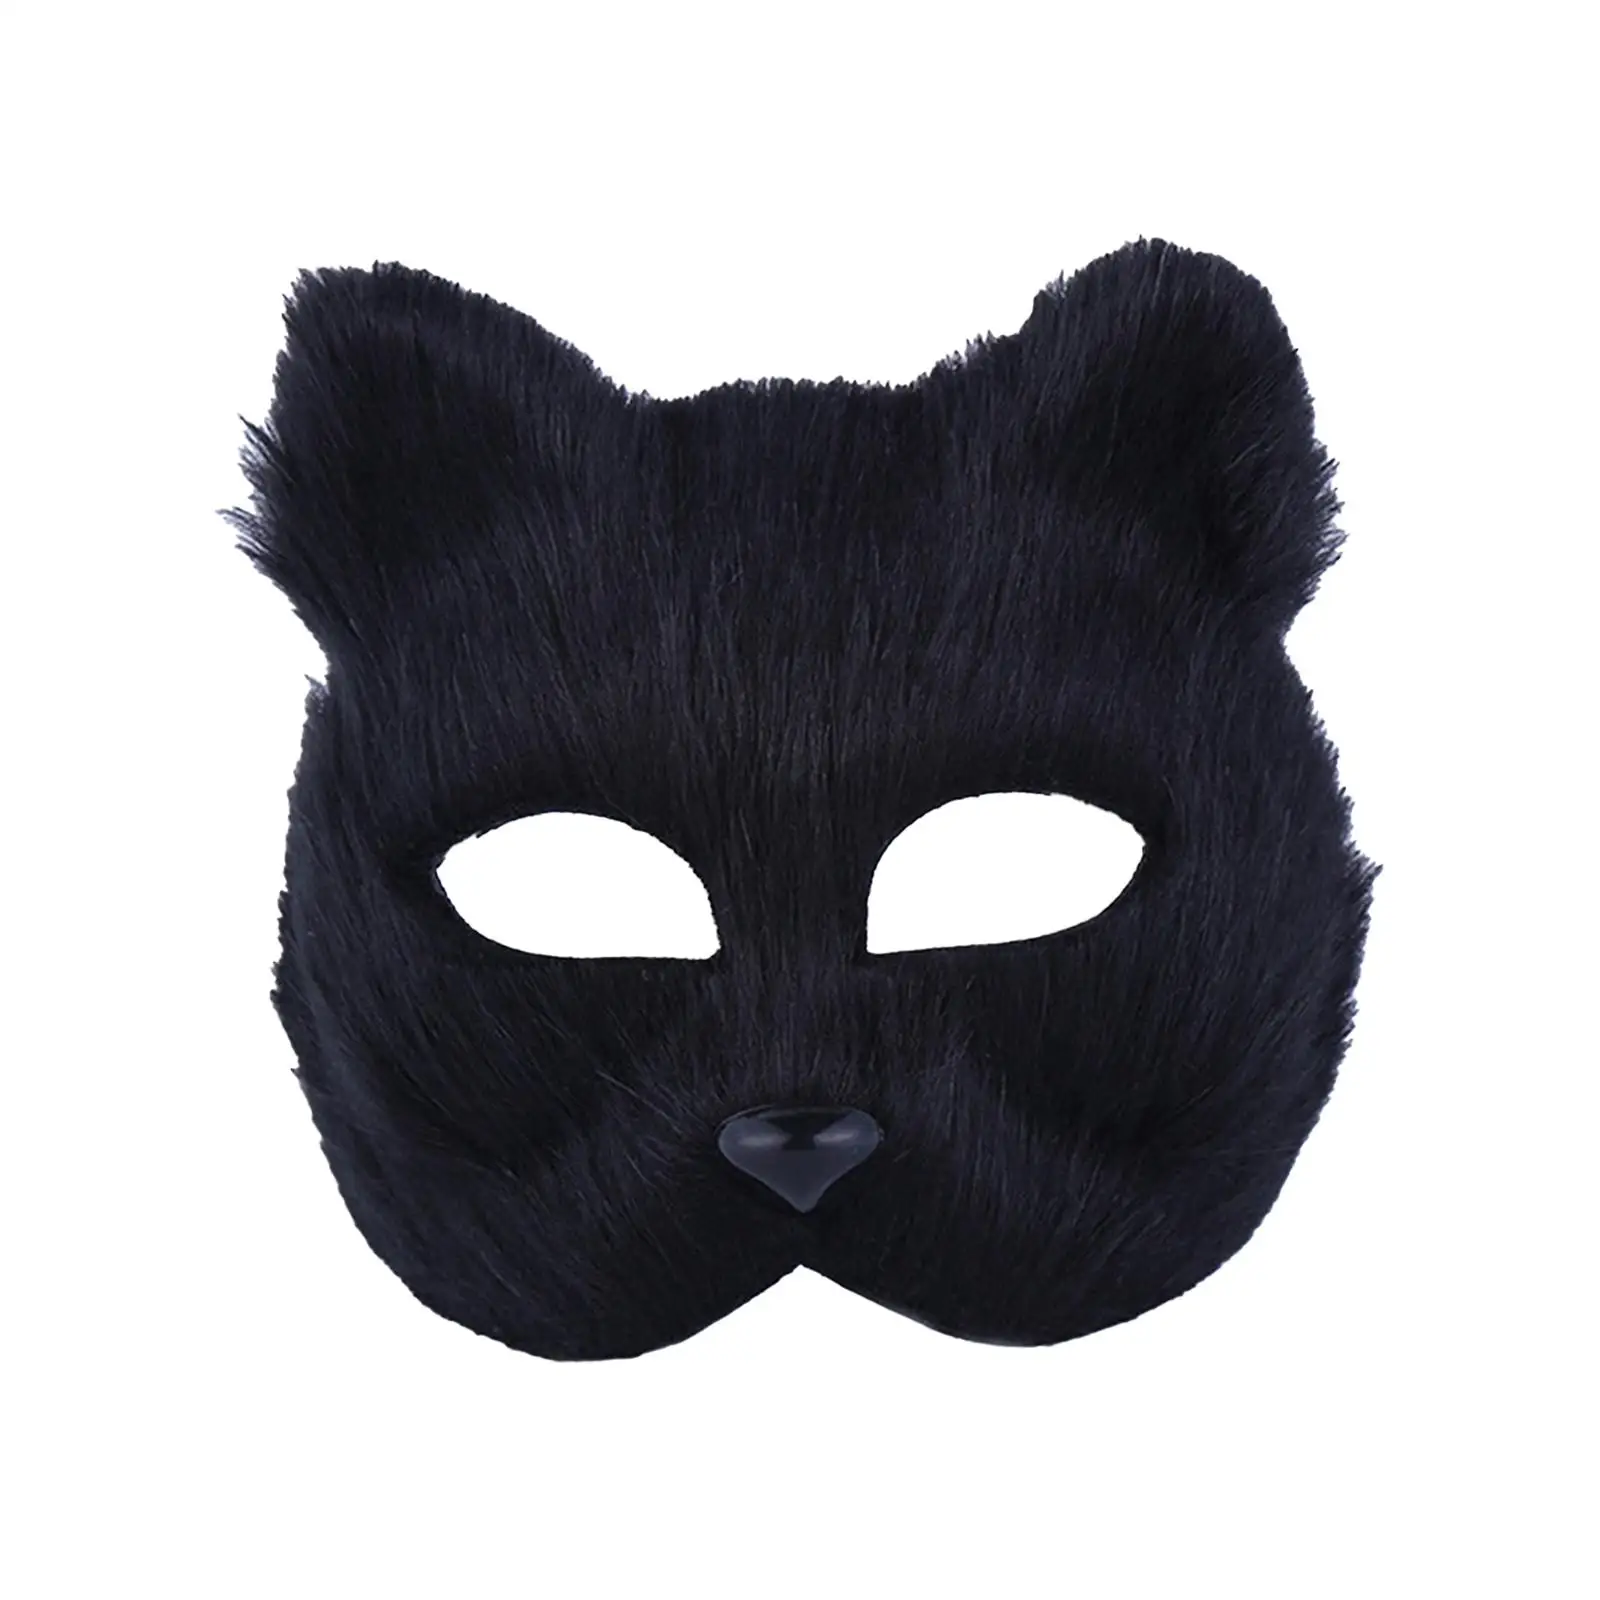 Furry Fox Mask Animal Cosplay Mask Prom Mask Decor with Adjustable Strap Party Funny Holiday Fox Halloween Mask Costume Mask